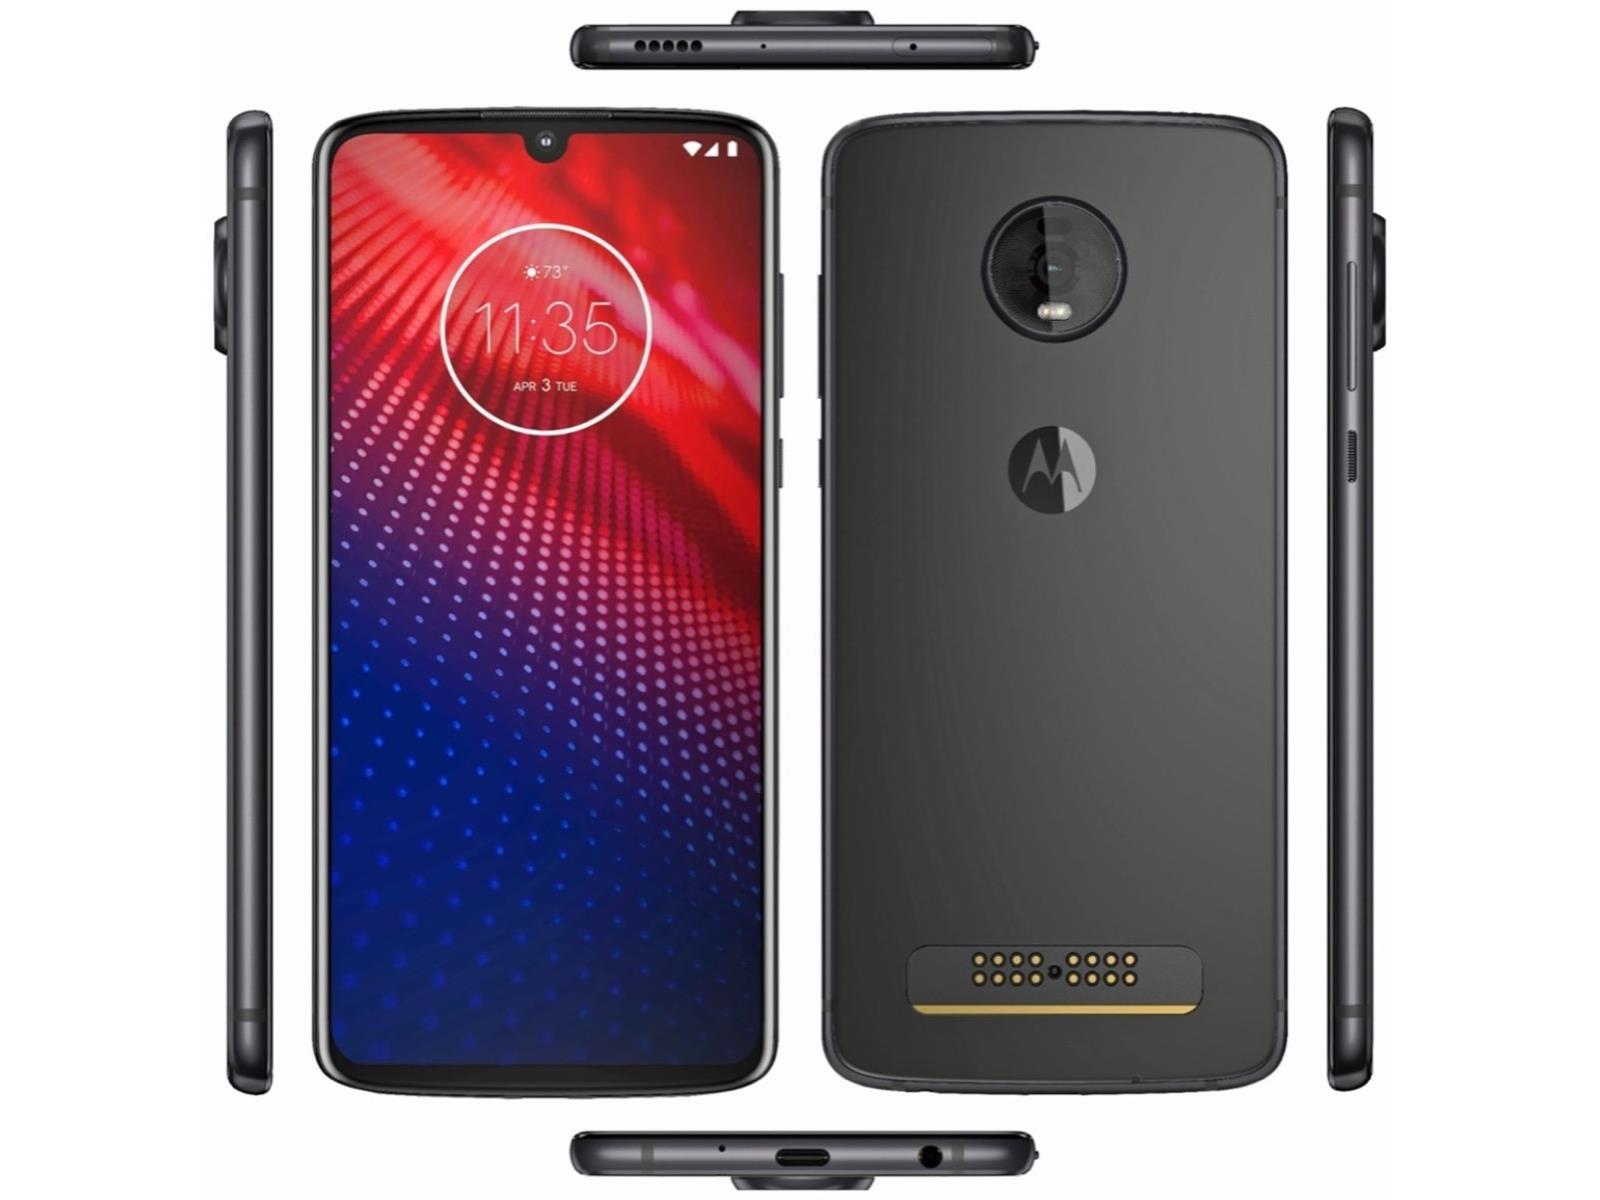 The Motorola moto z4 is the Gadget Lover's Flagship Smartphone